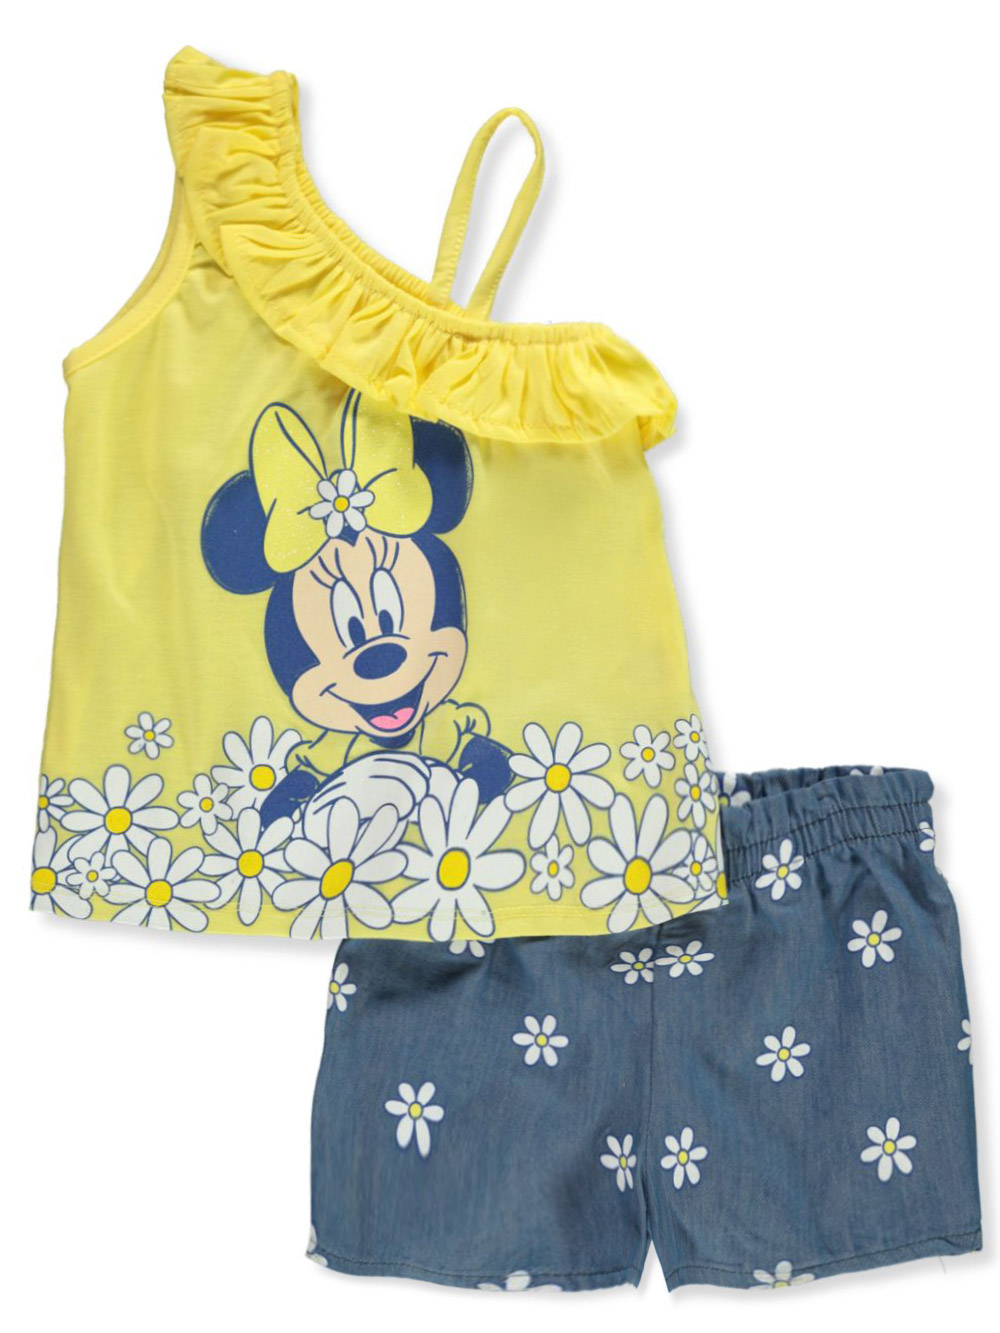 Disney Minnie Mouse Girls' 2-Piece Daisy Shorts Set Outfit - yellow/multi, 3t (Toddler) - image 1 of 3